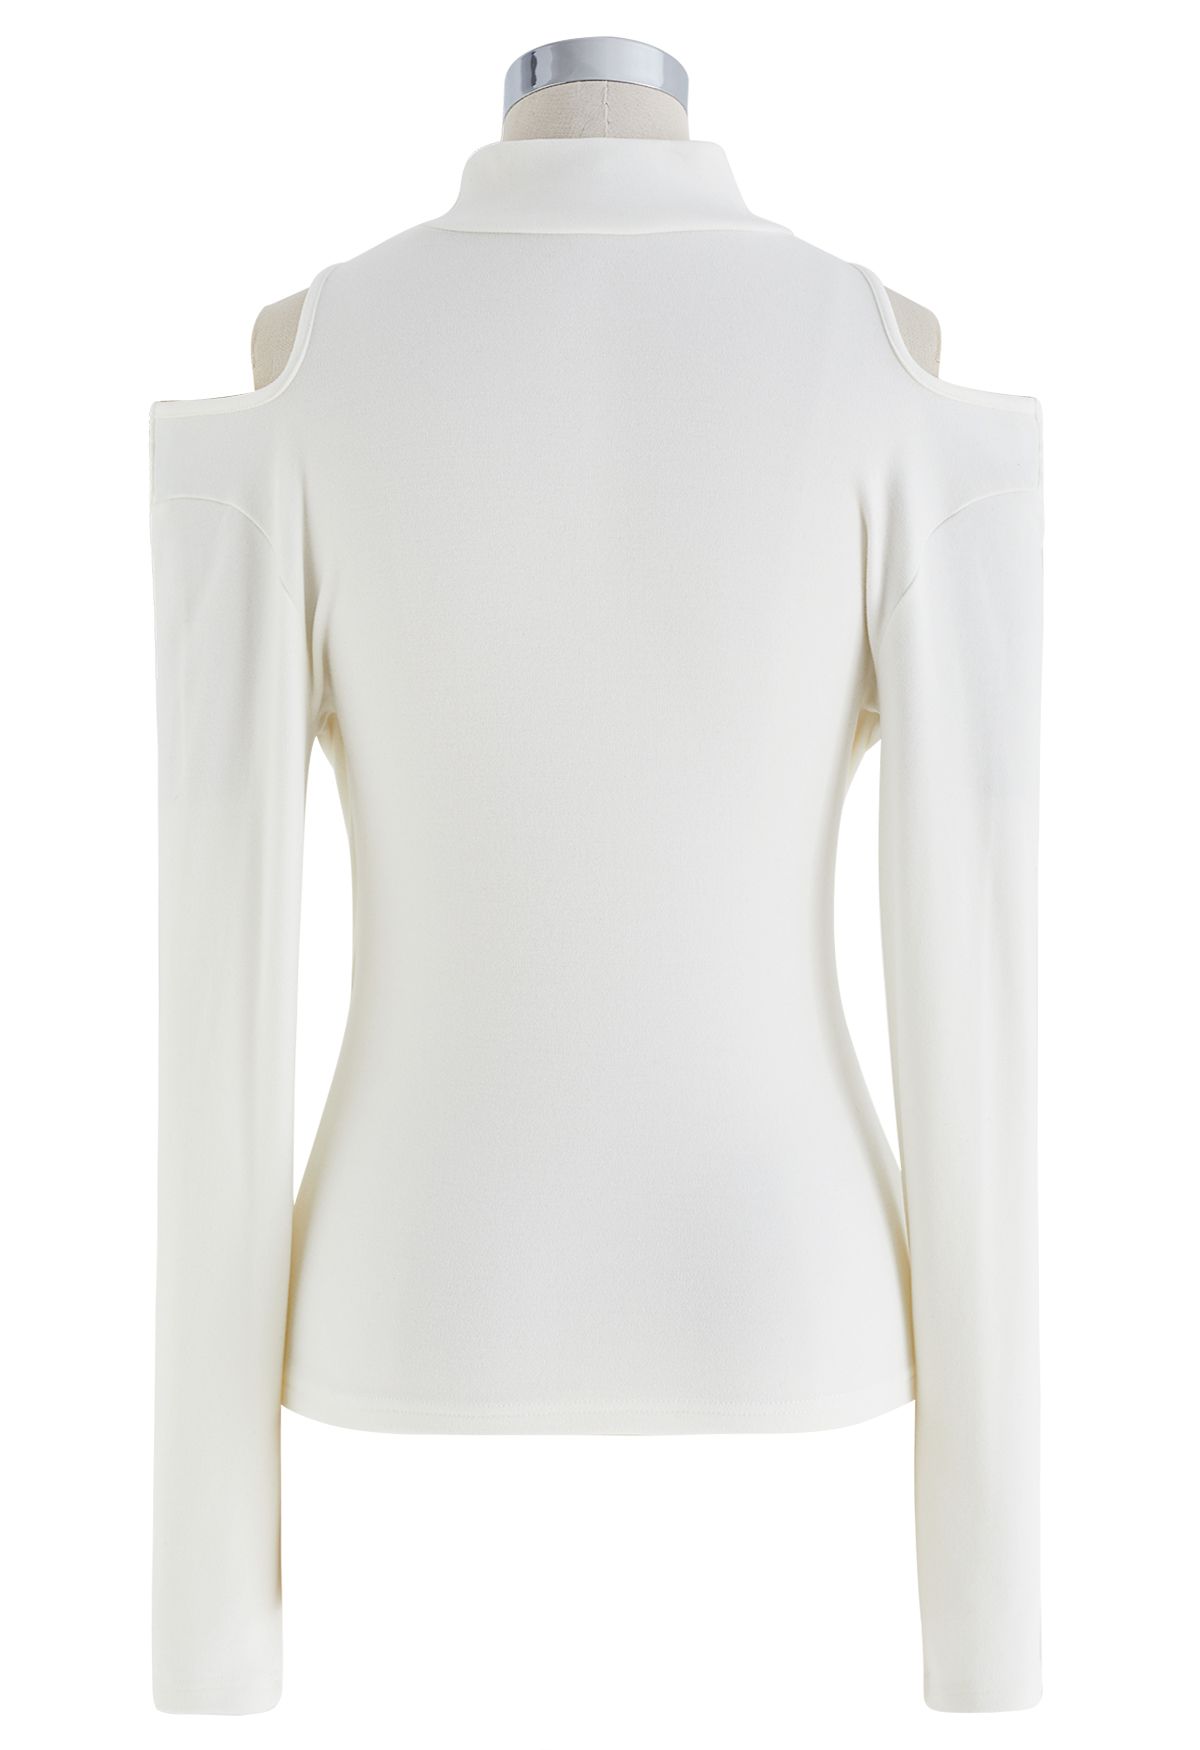 Skin-Friendly Cold-Shoulder Top in White